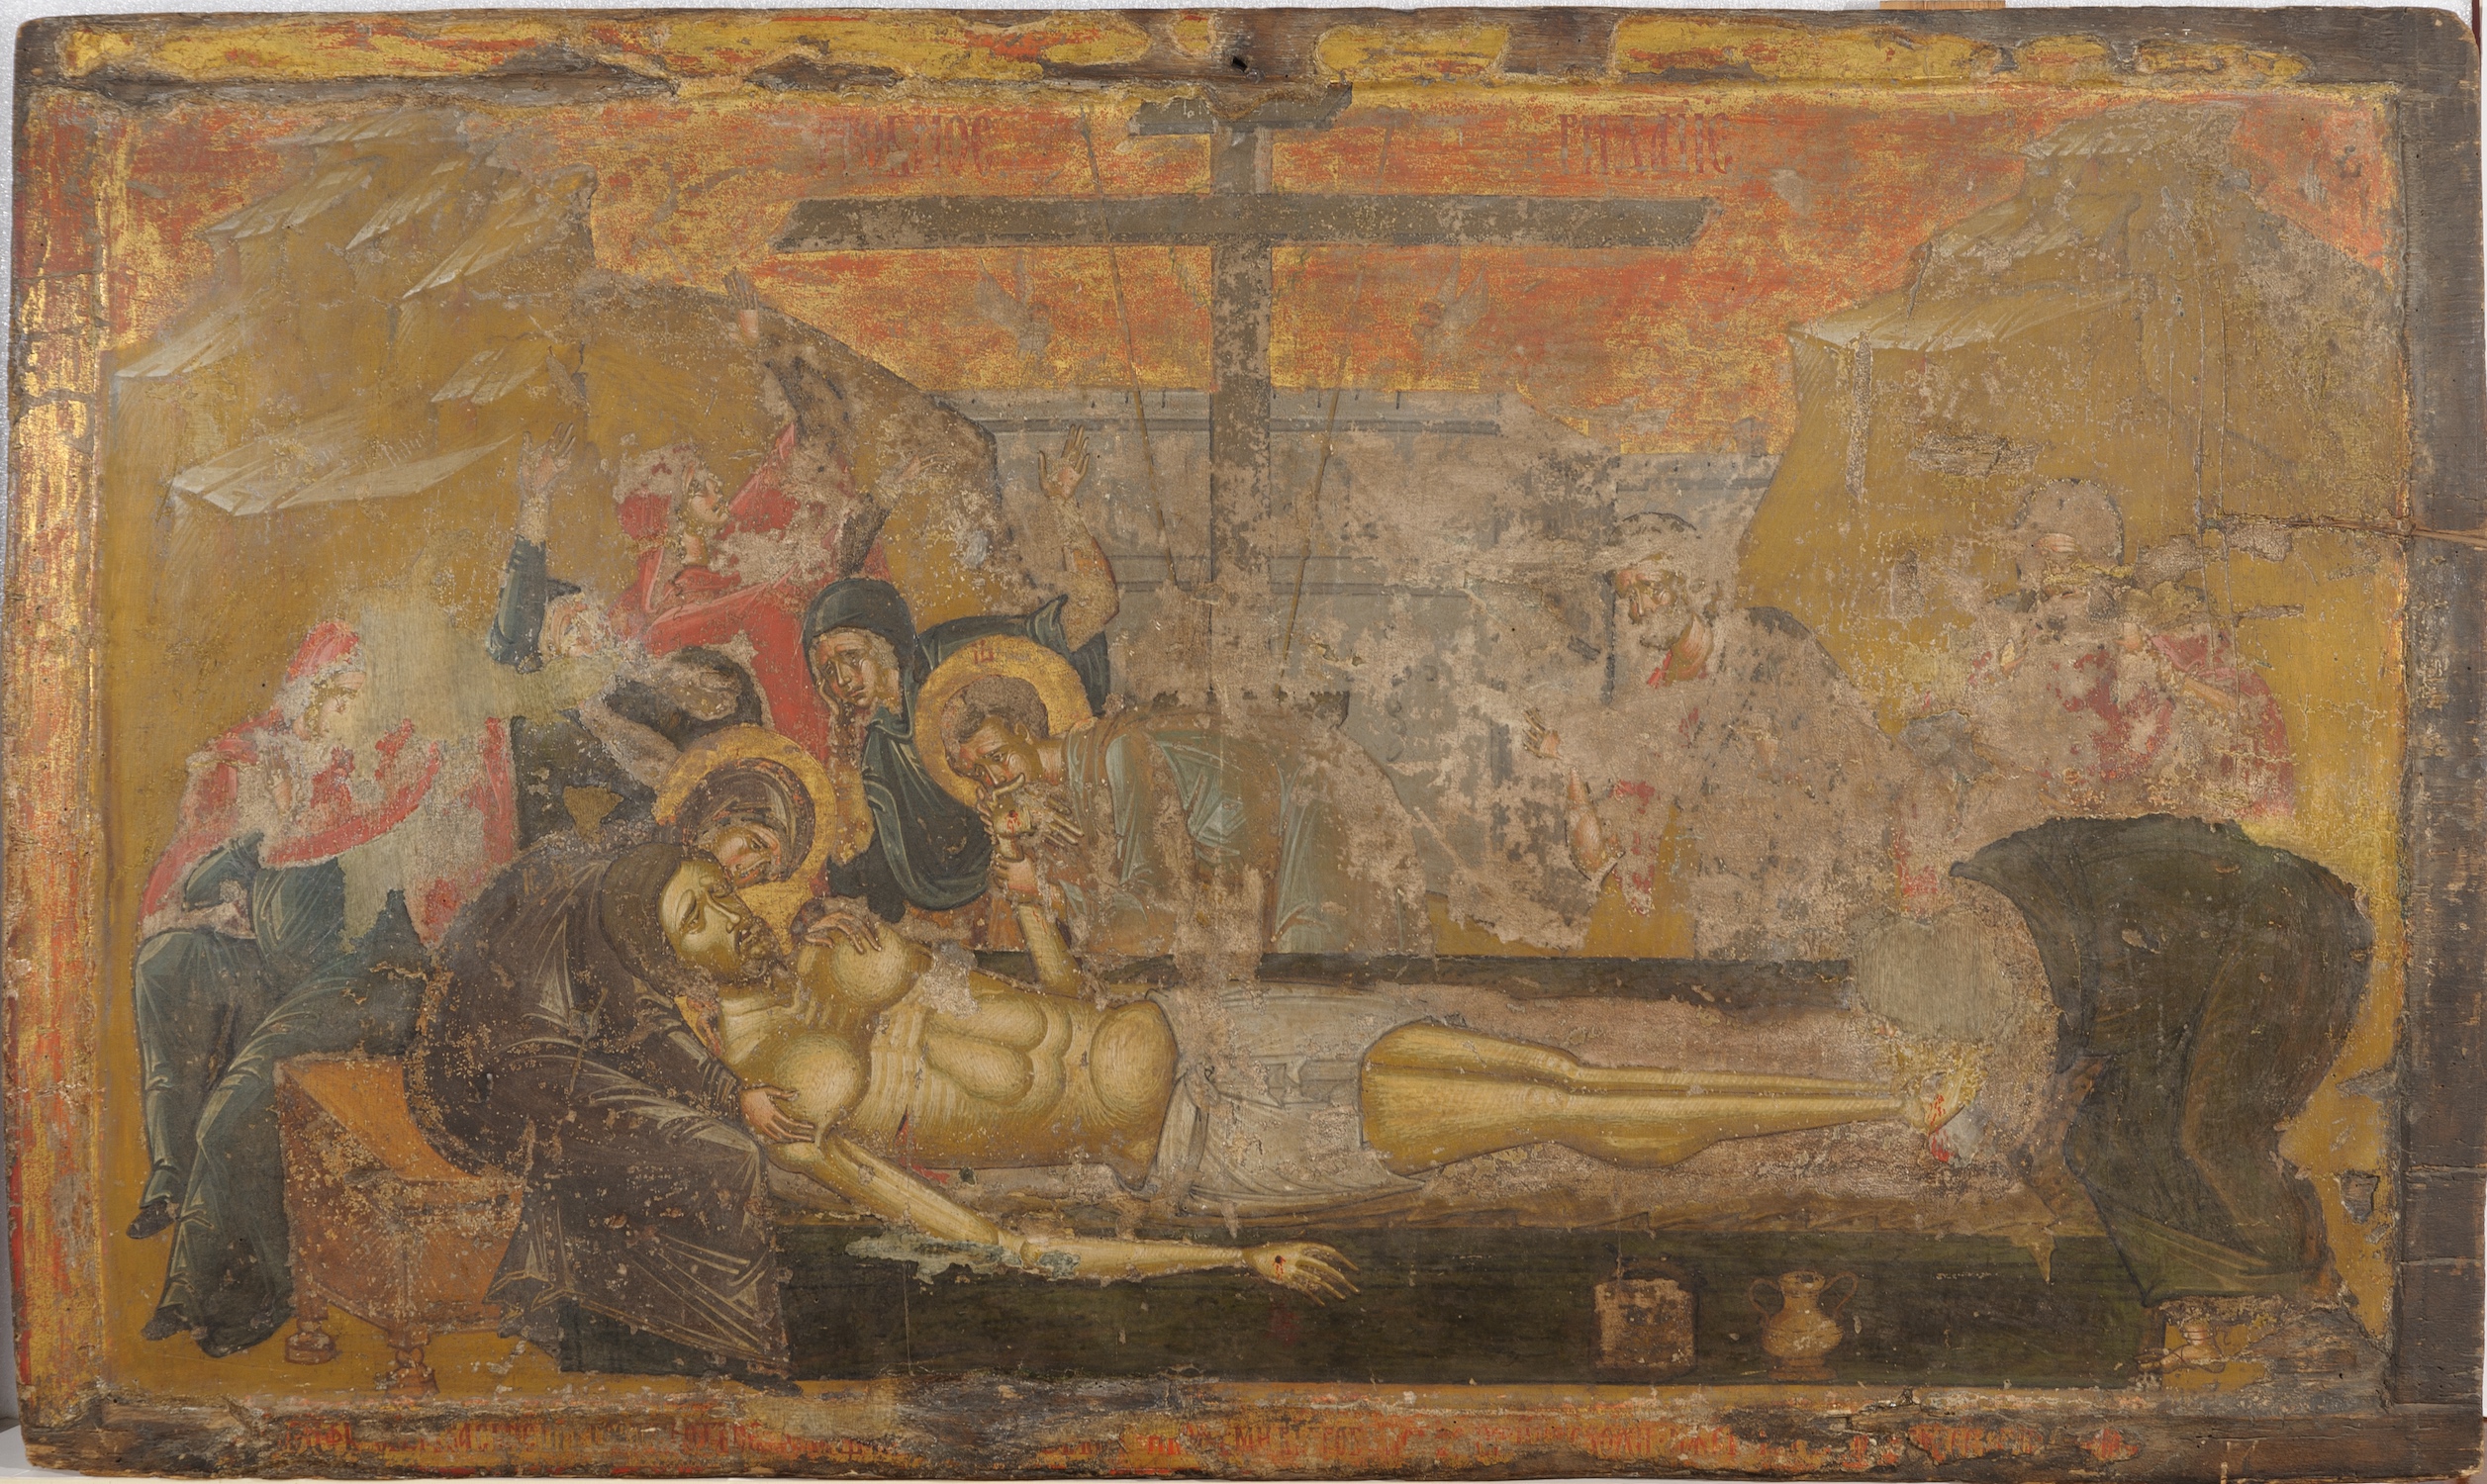 Lamentation of Christ, early 16th century, 65.5 x 111 cm, 11346/i3. (source: National Museum of Art, Bucharest)